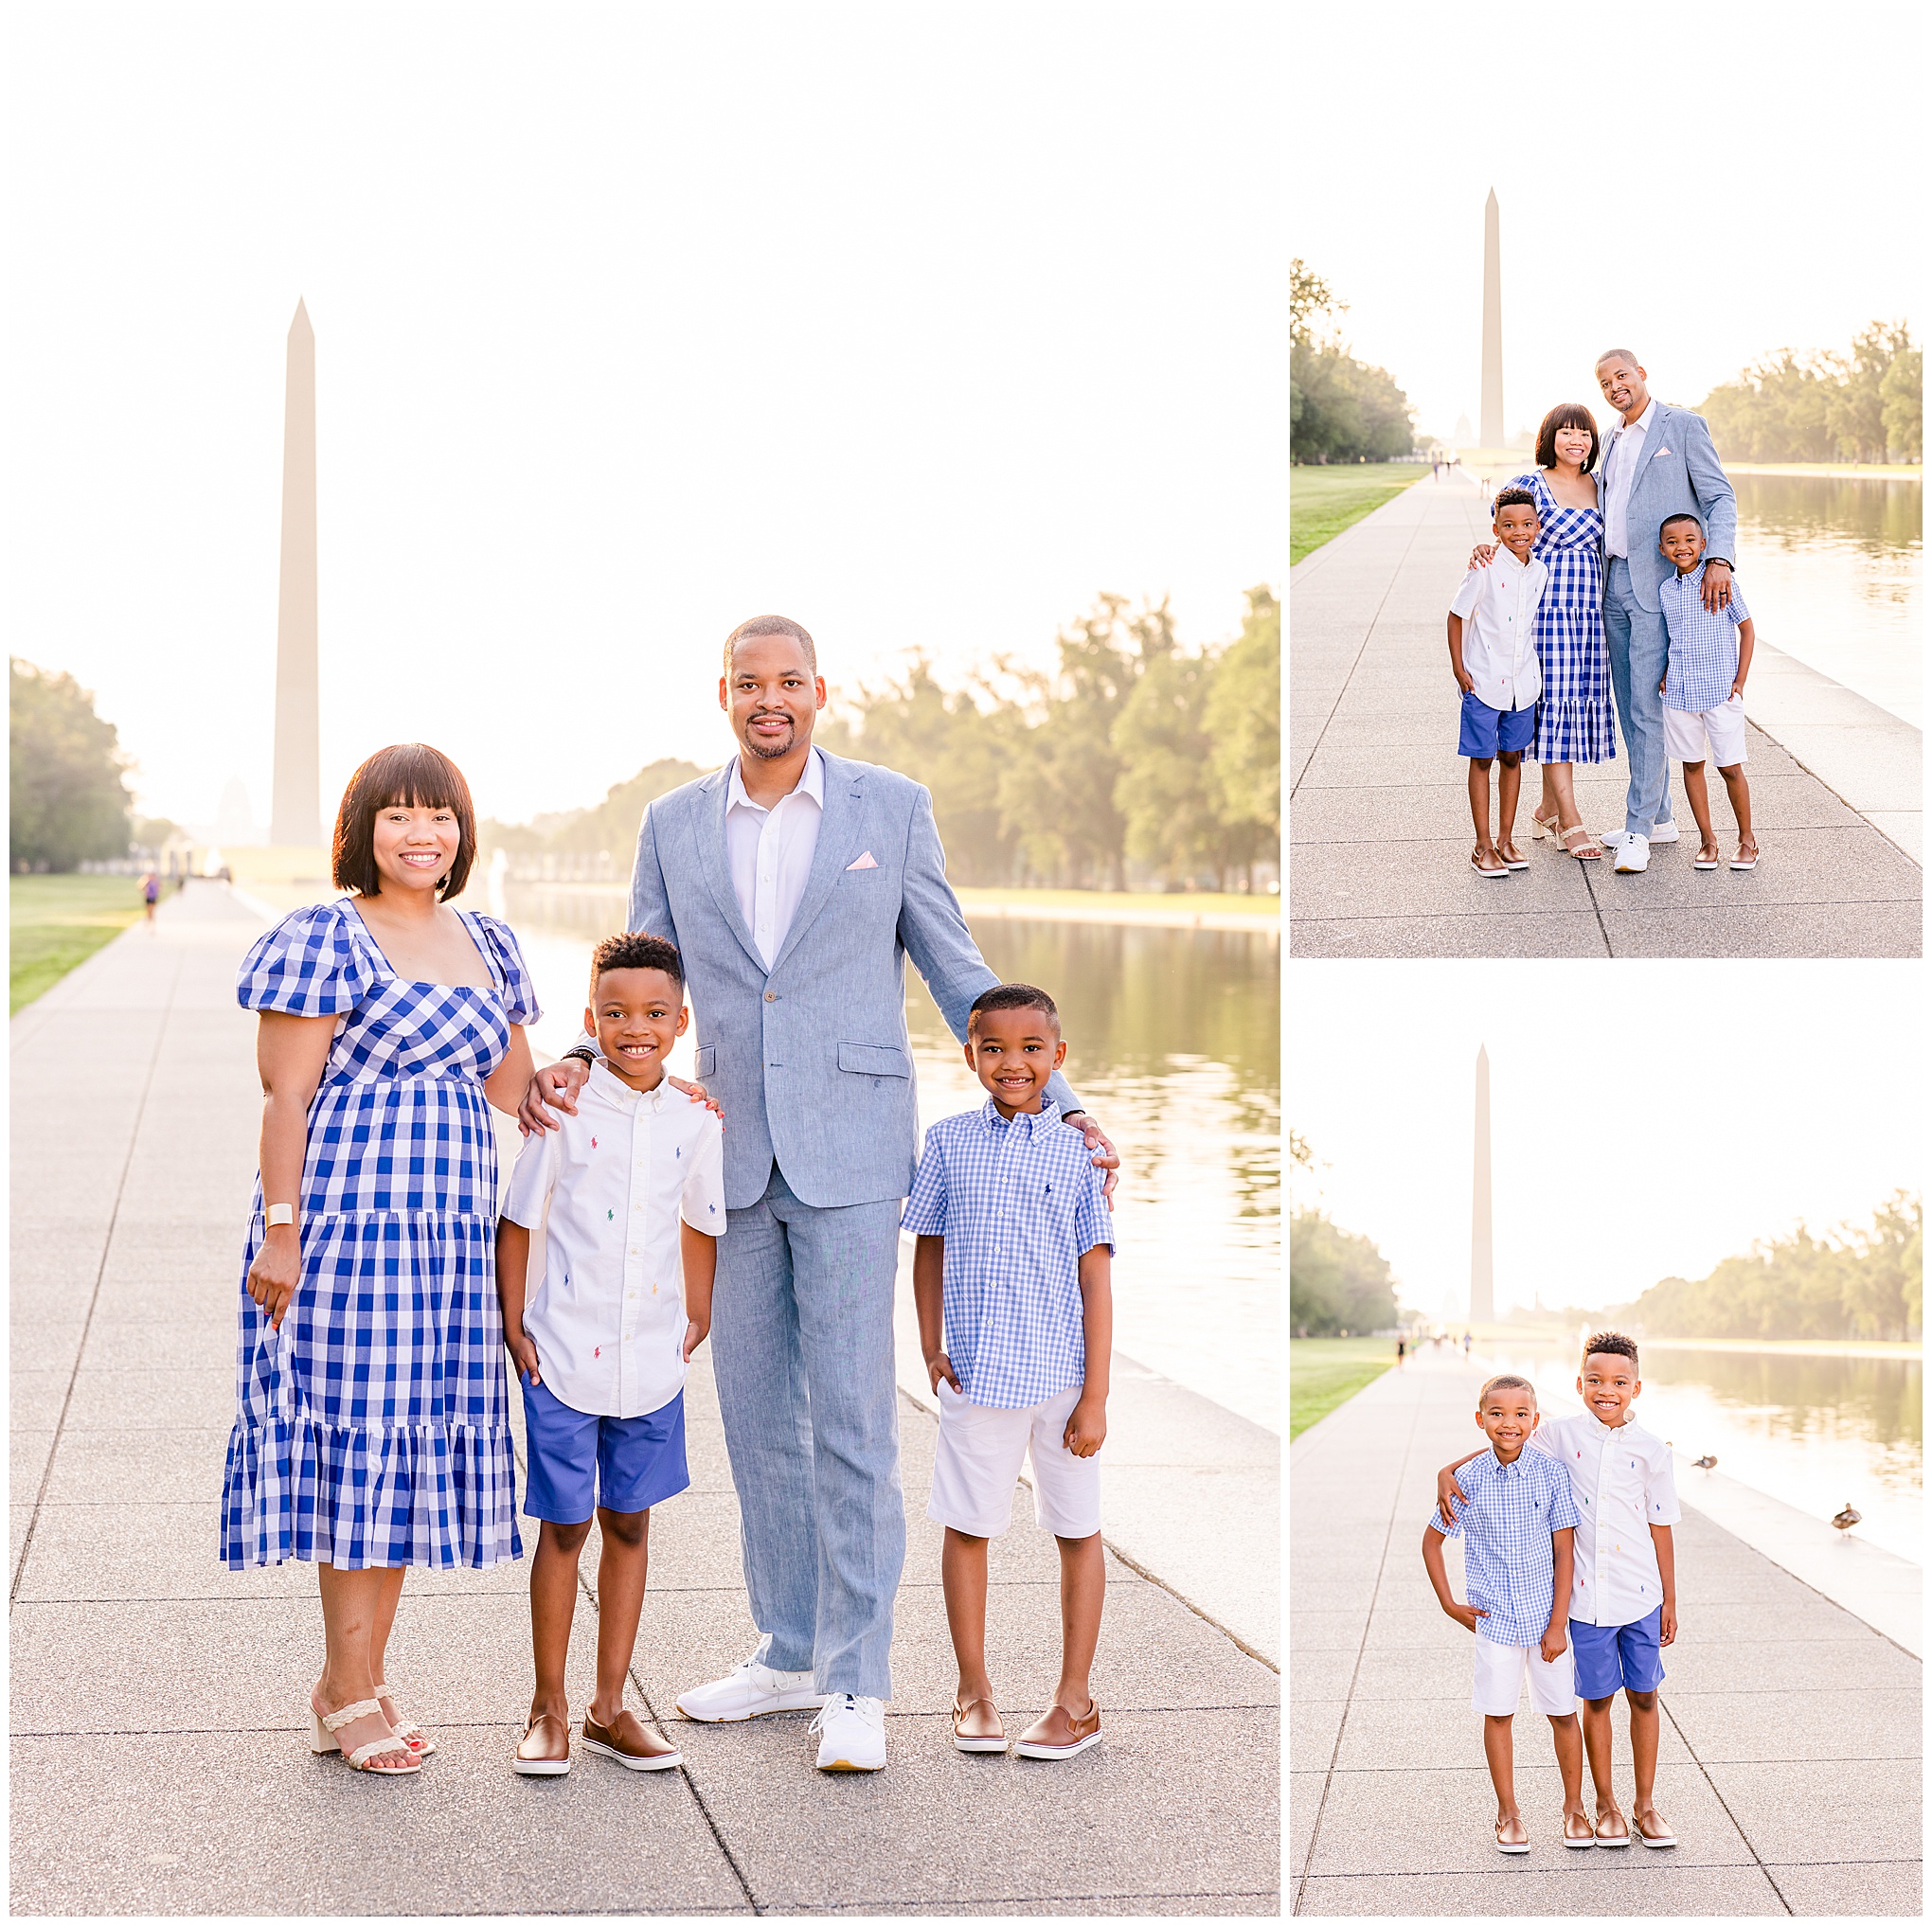 summer Lincoln Memorial family photos, Lincoln Memorial portraits, DC family photos, National Mall family photos, summer of four, family portrait poses, Lincoln Memorial portraits, DC family photographer, Rachel E.H. Photography, family smiling, brothers smiling